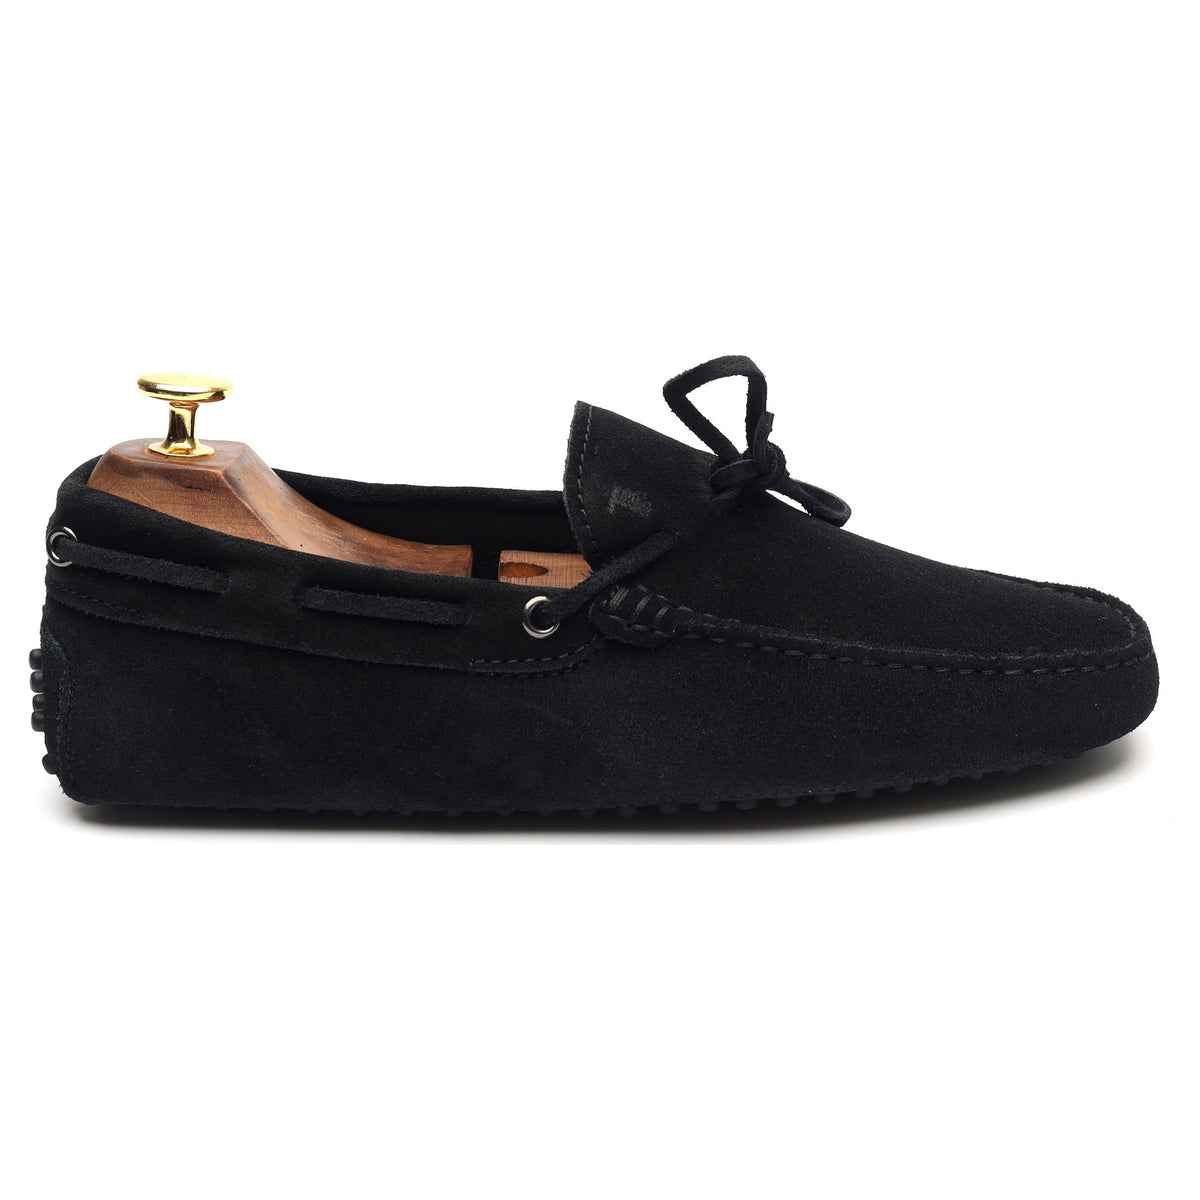 Gommino Black Suede Driving Loafers UK 6